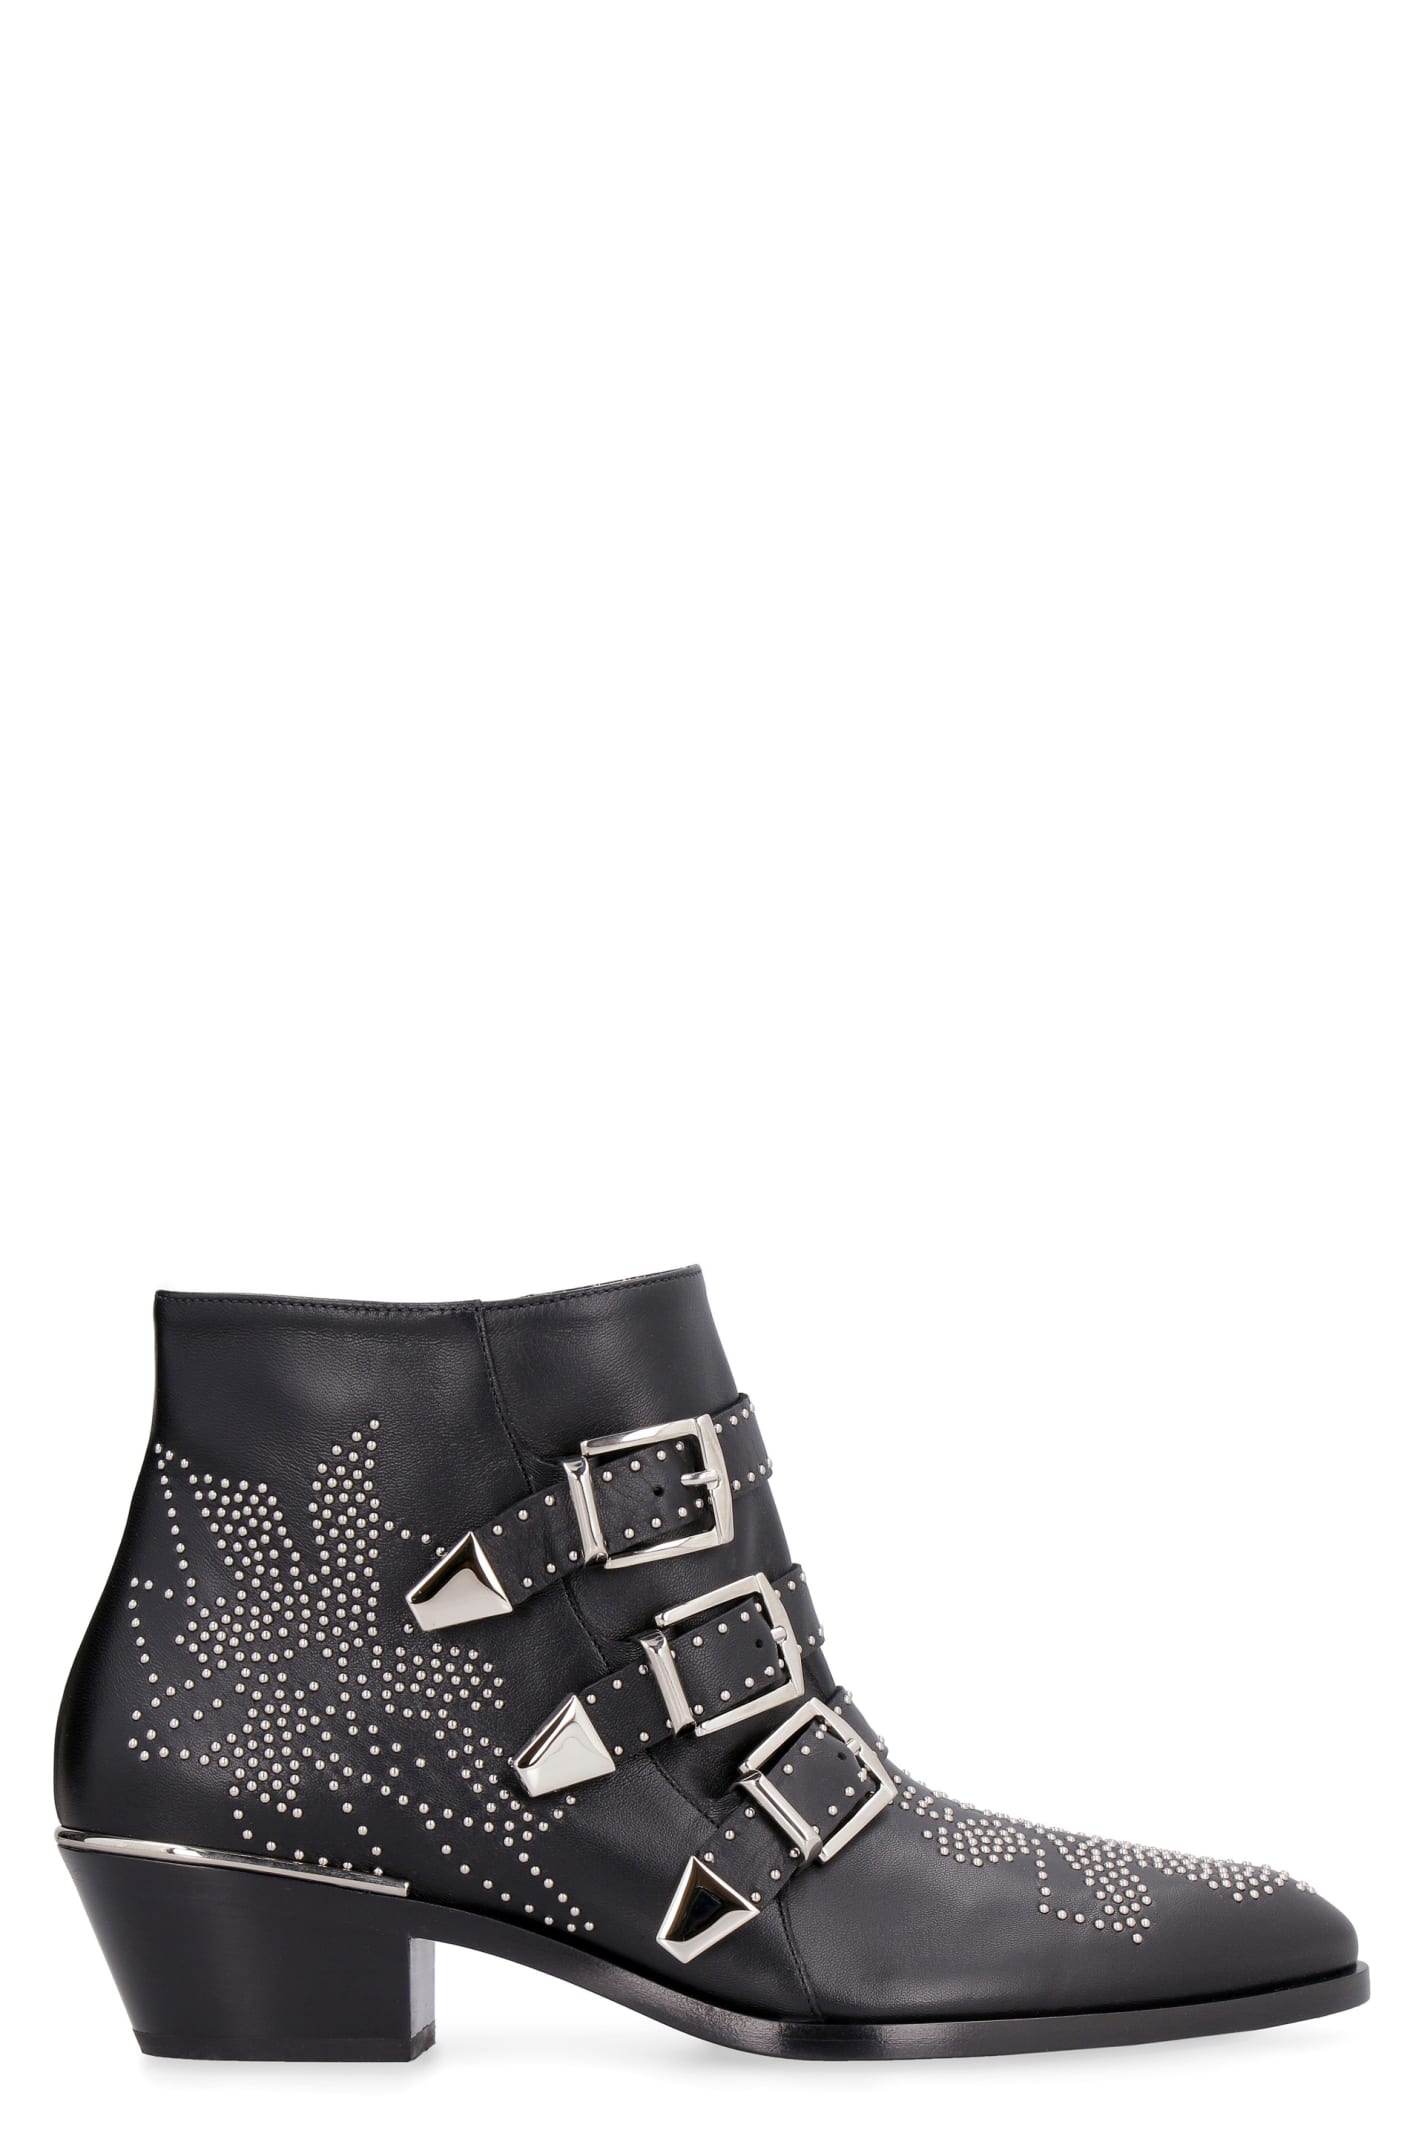 Chloé Susan Studded Leather Ankle Boots